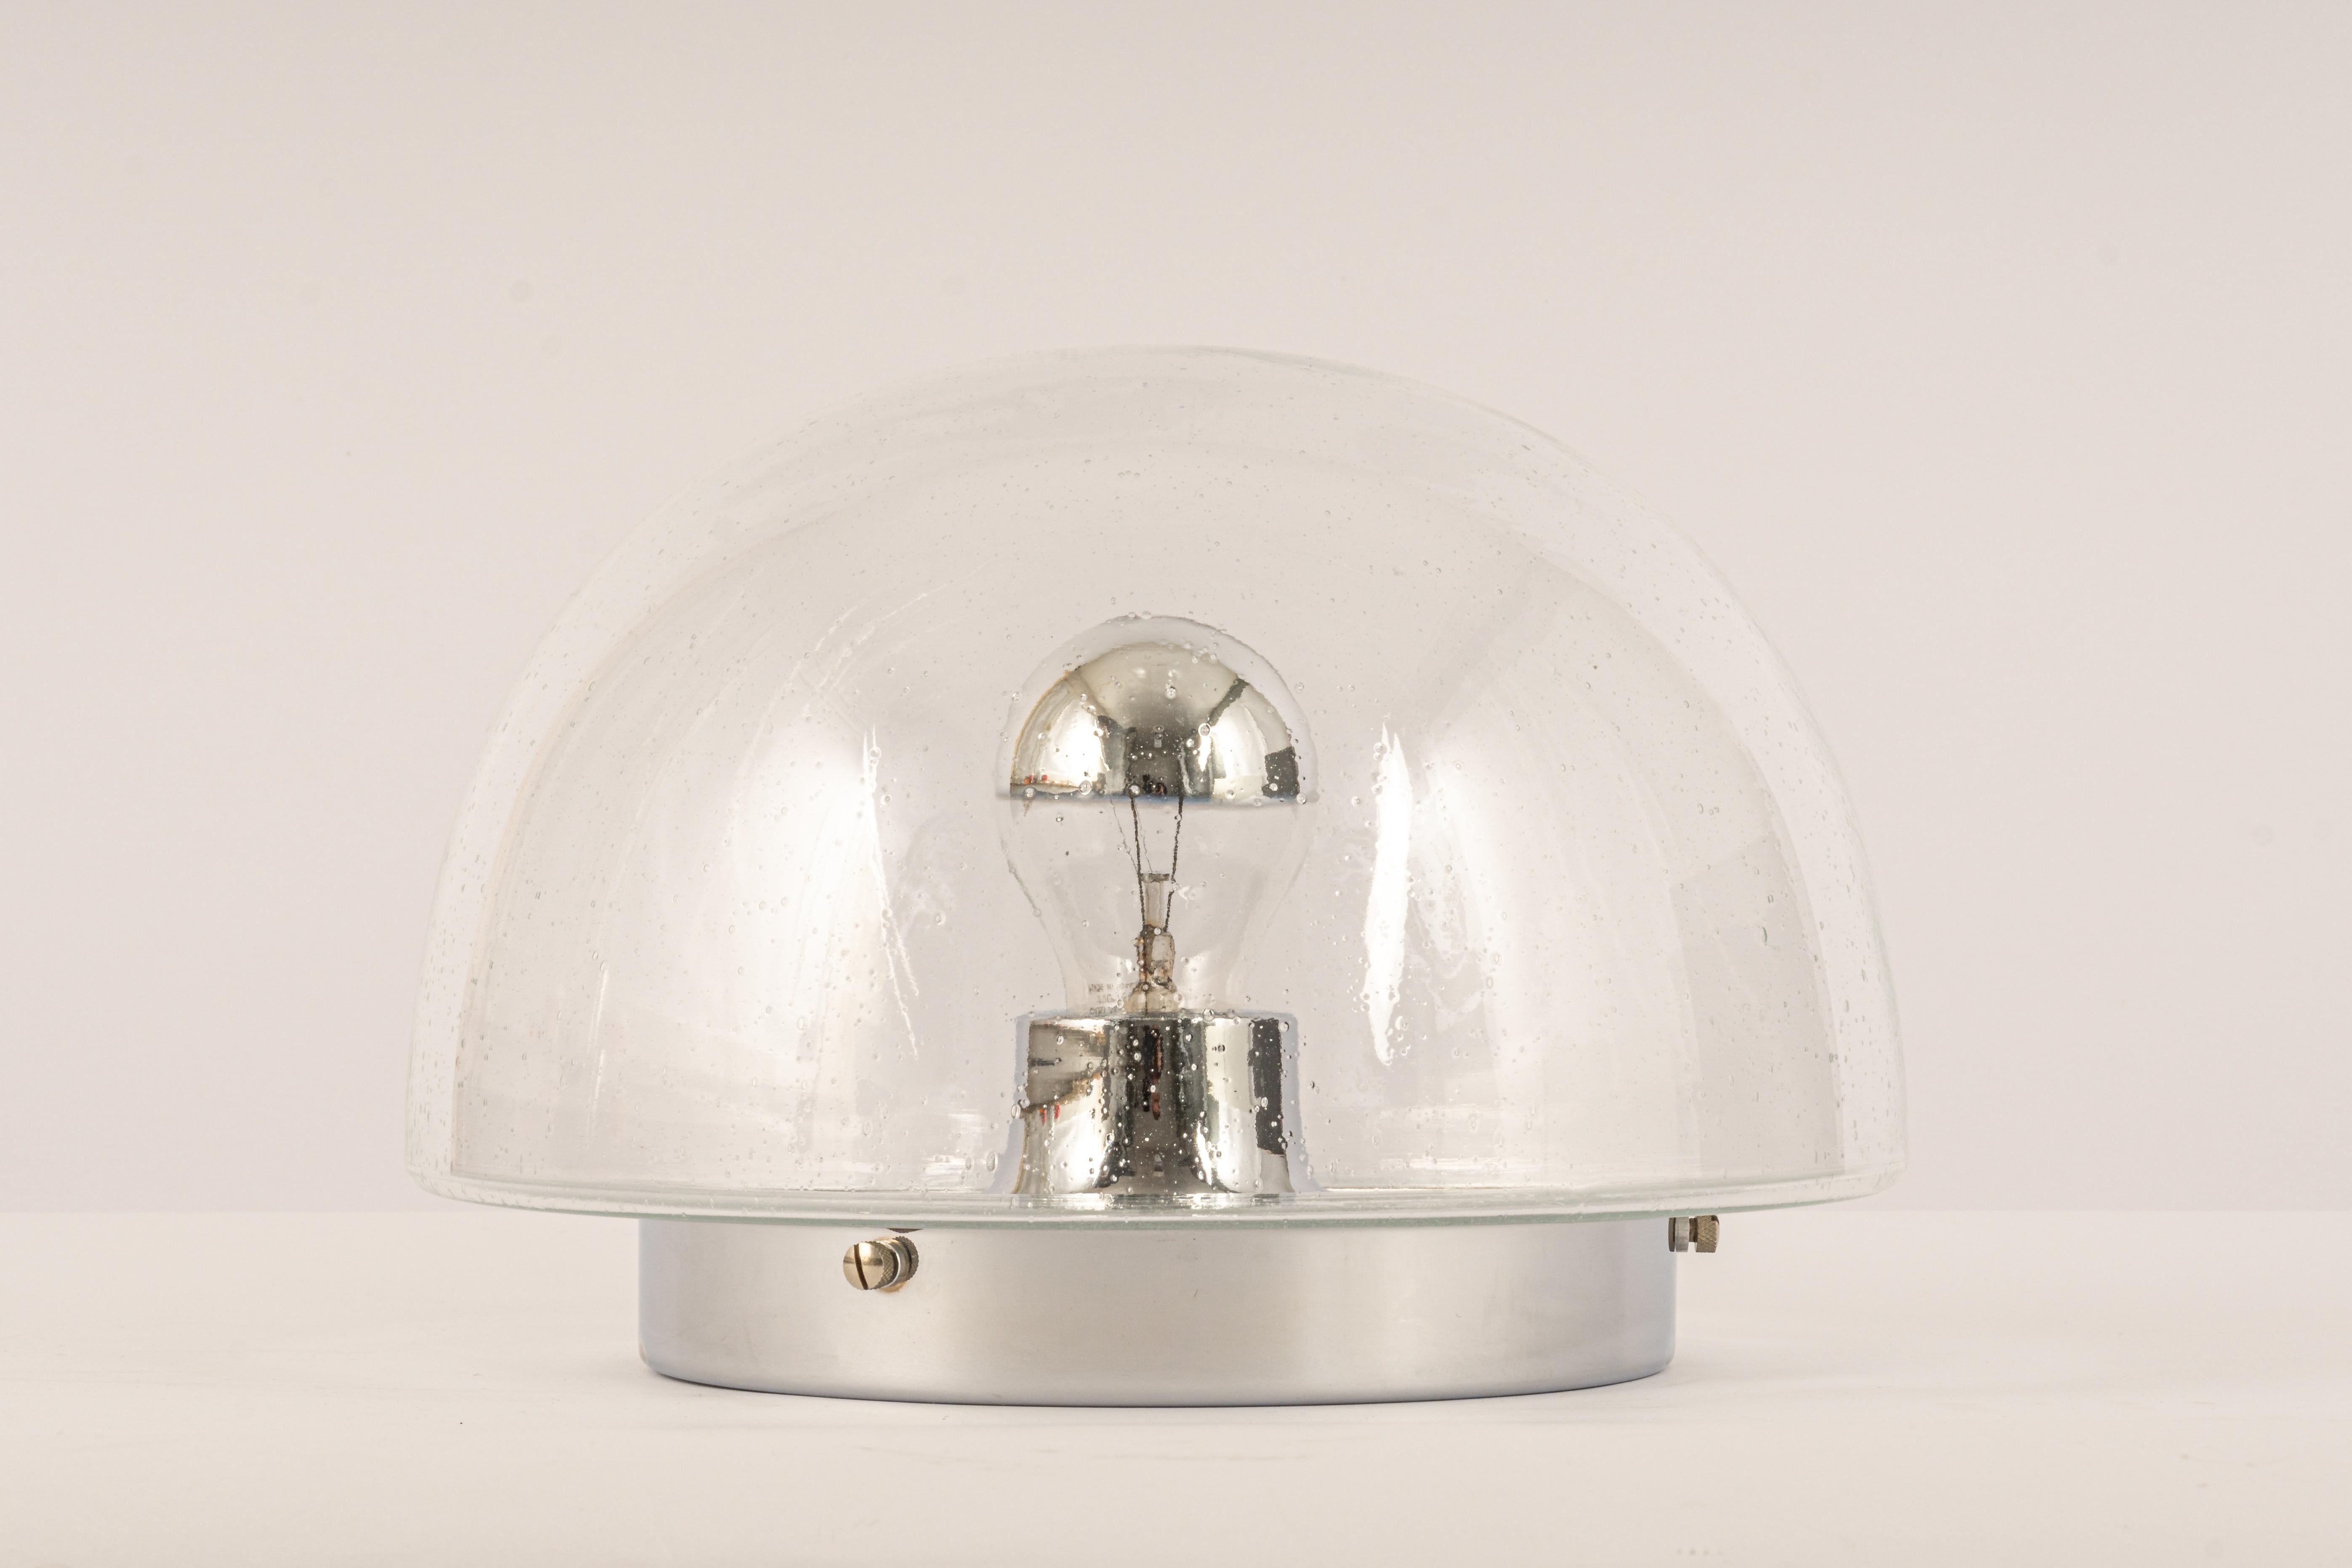 Stunning midcentury ceiling or wall light, by Glashütte Limburg, Germany, 1970s.
Made of hand-blown glass and chrome.
Sockets: It needs 1 x E27 standard bulb.
Light bulbs are not included. It is possible to install this fixture in all countries